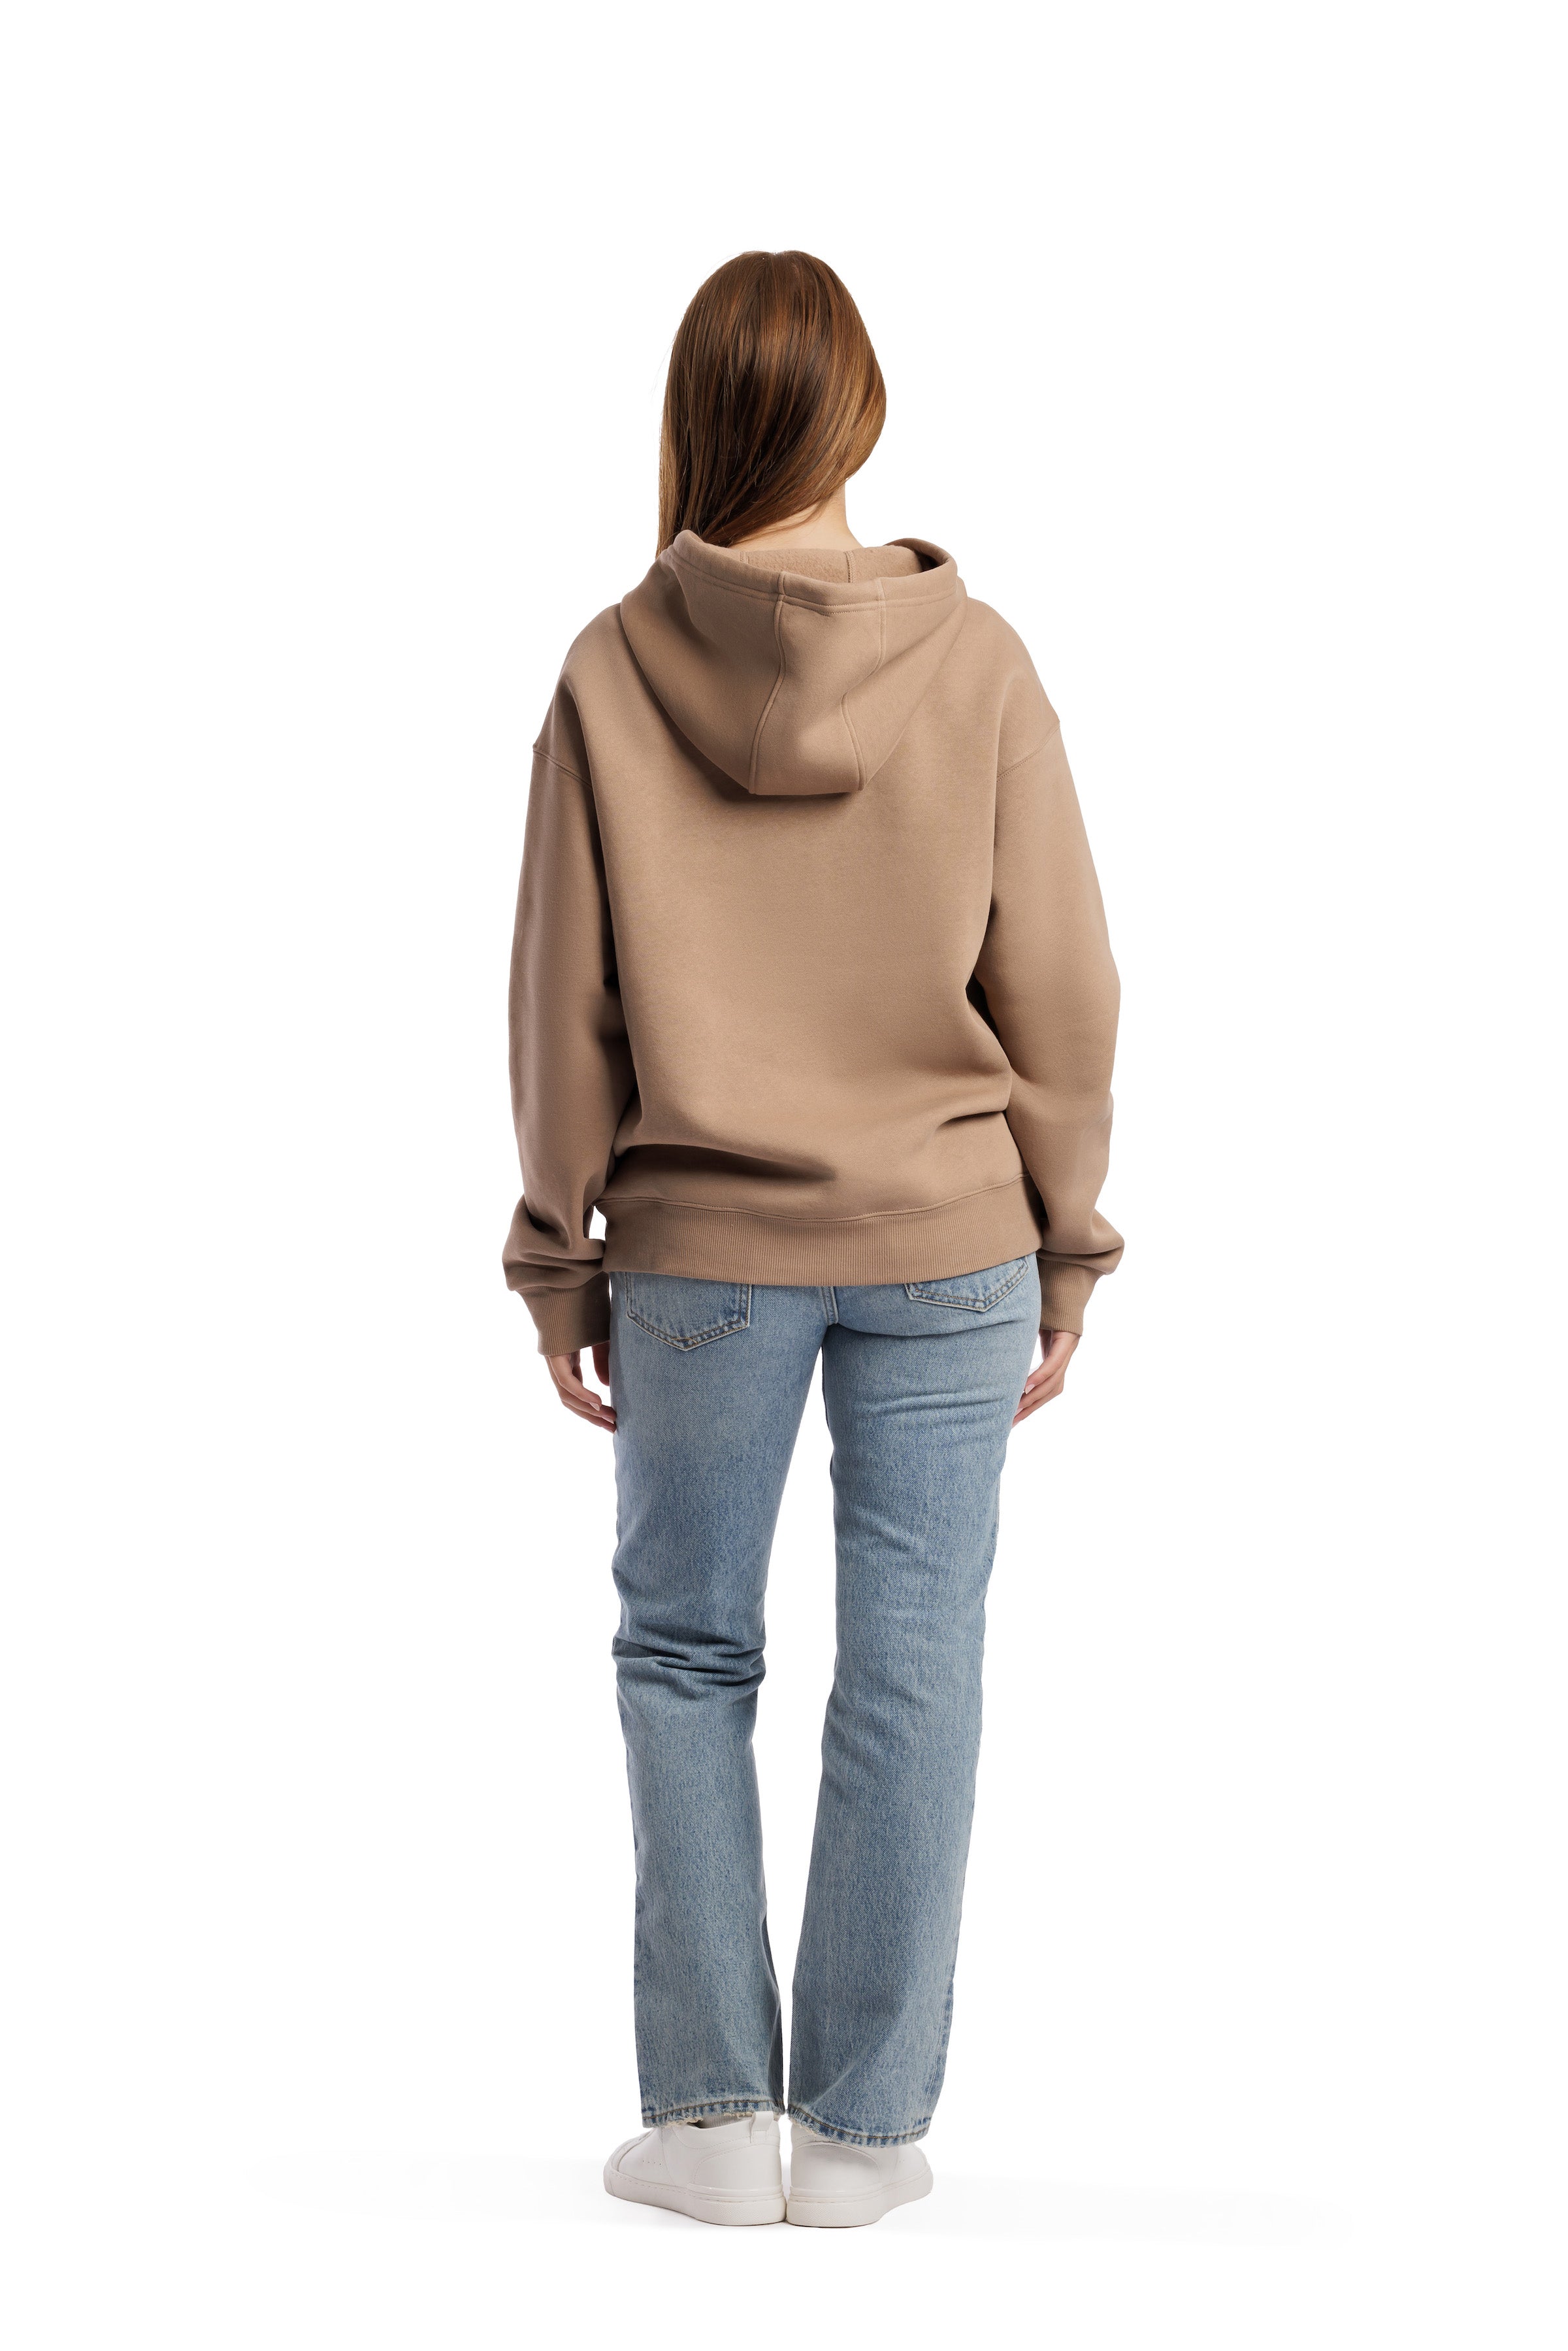 Cheeky relaxed hoodie in camel